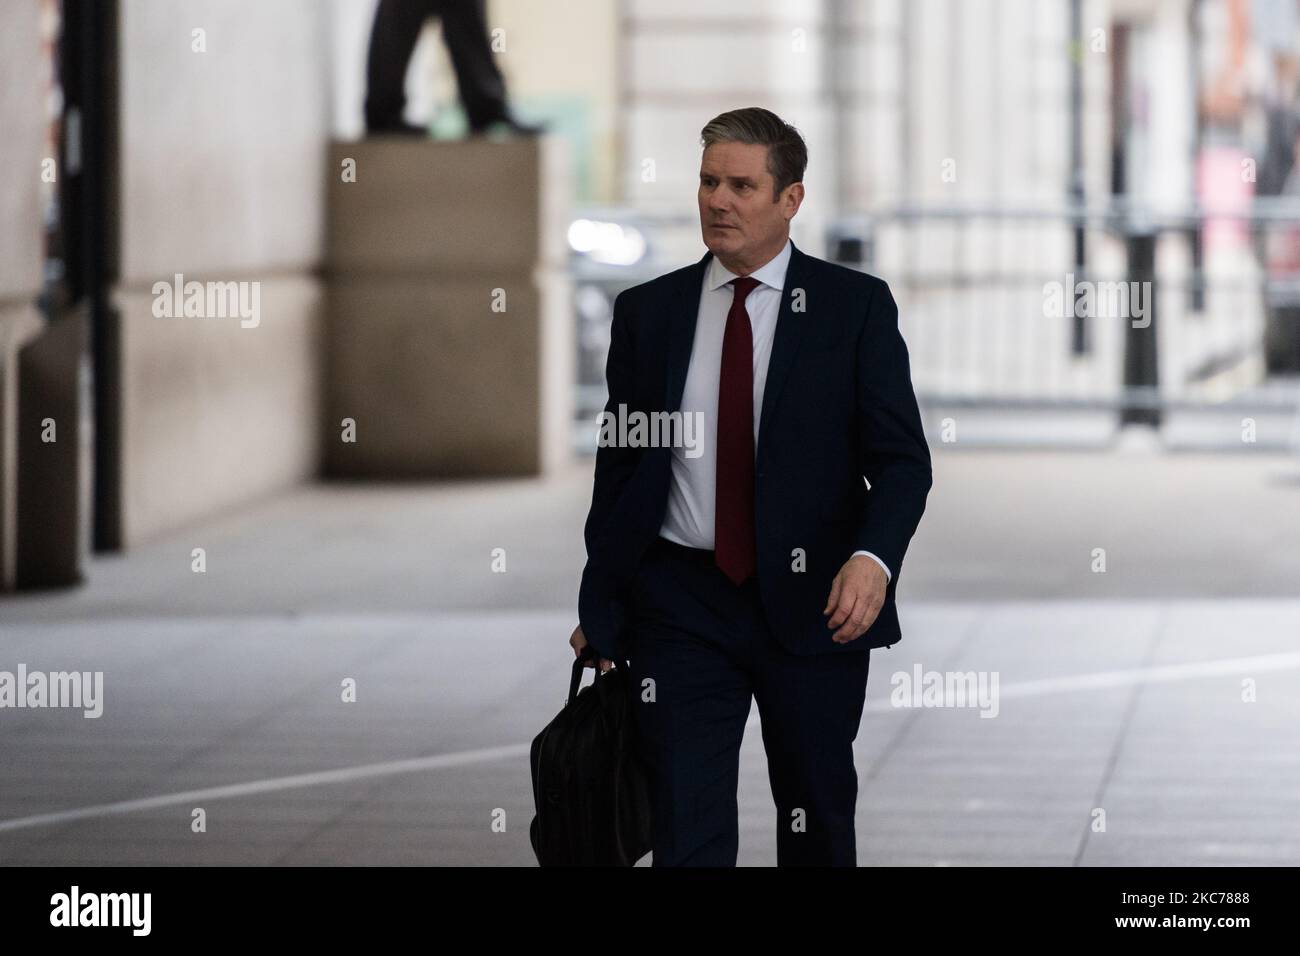 Labour Party Leader Sir Keir Starmer arrives at the BBC Broadcasting House in central London to appear on The Andrew Marr Show, on 10 January 2021 in London, England. (Photo by WIktor Szymanowicz/NurPhoto) Stock Photo